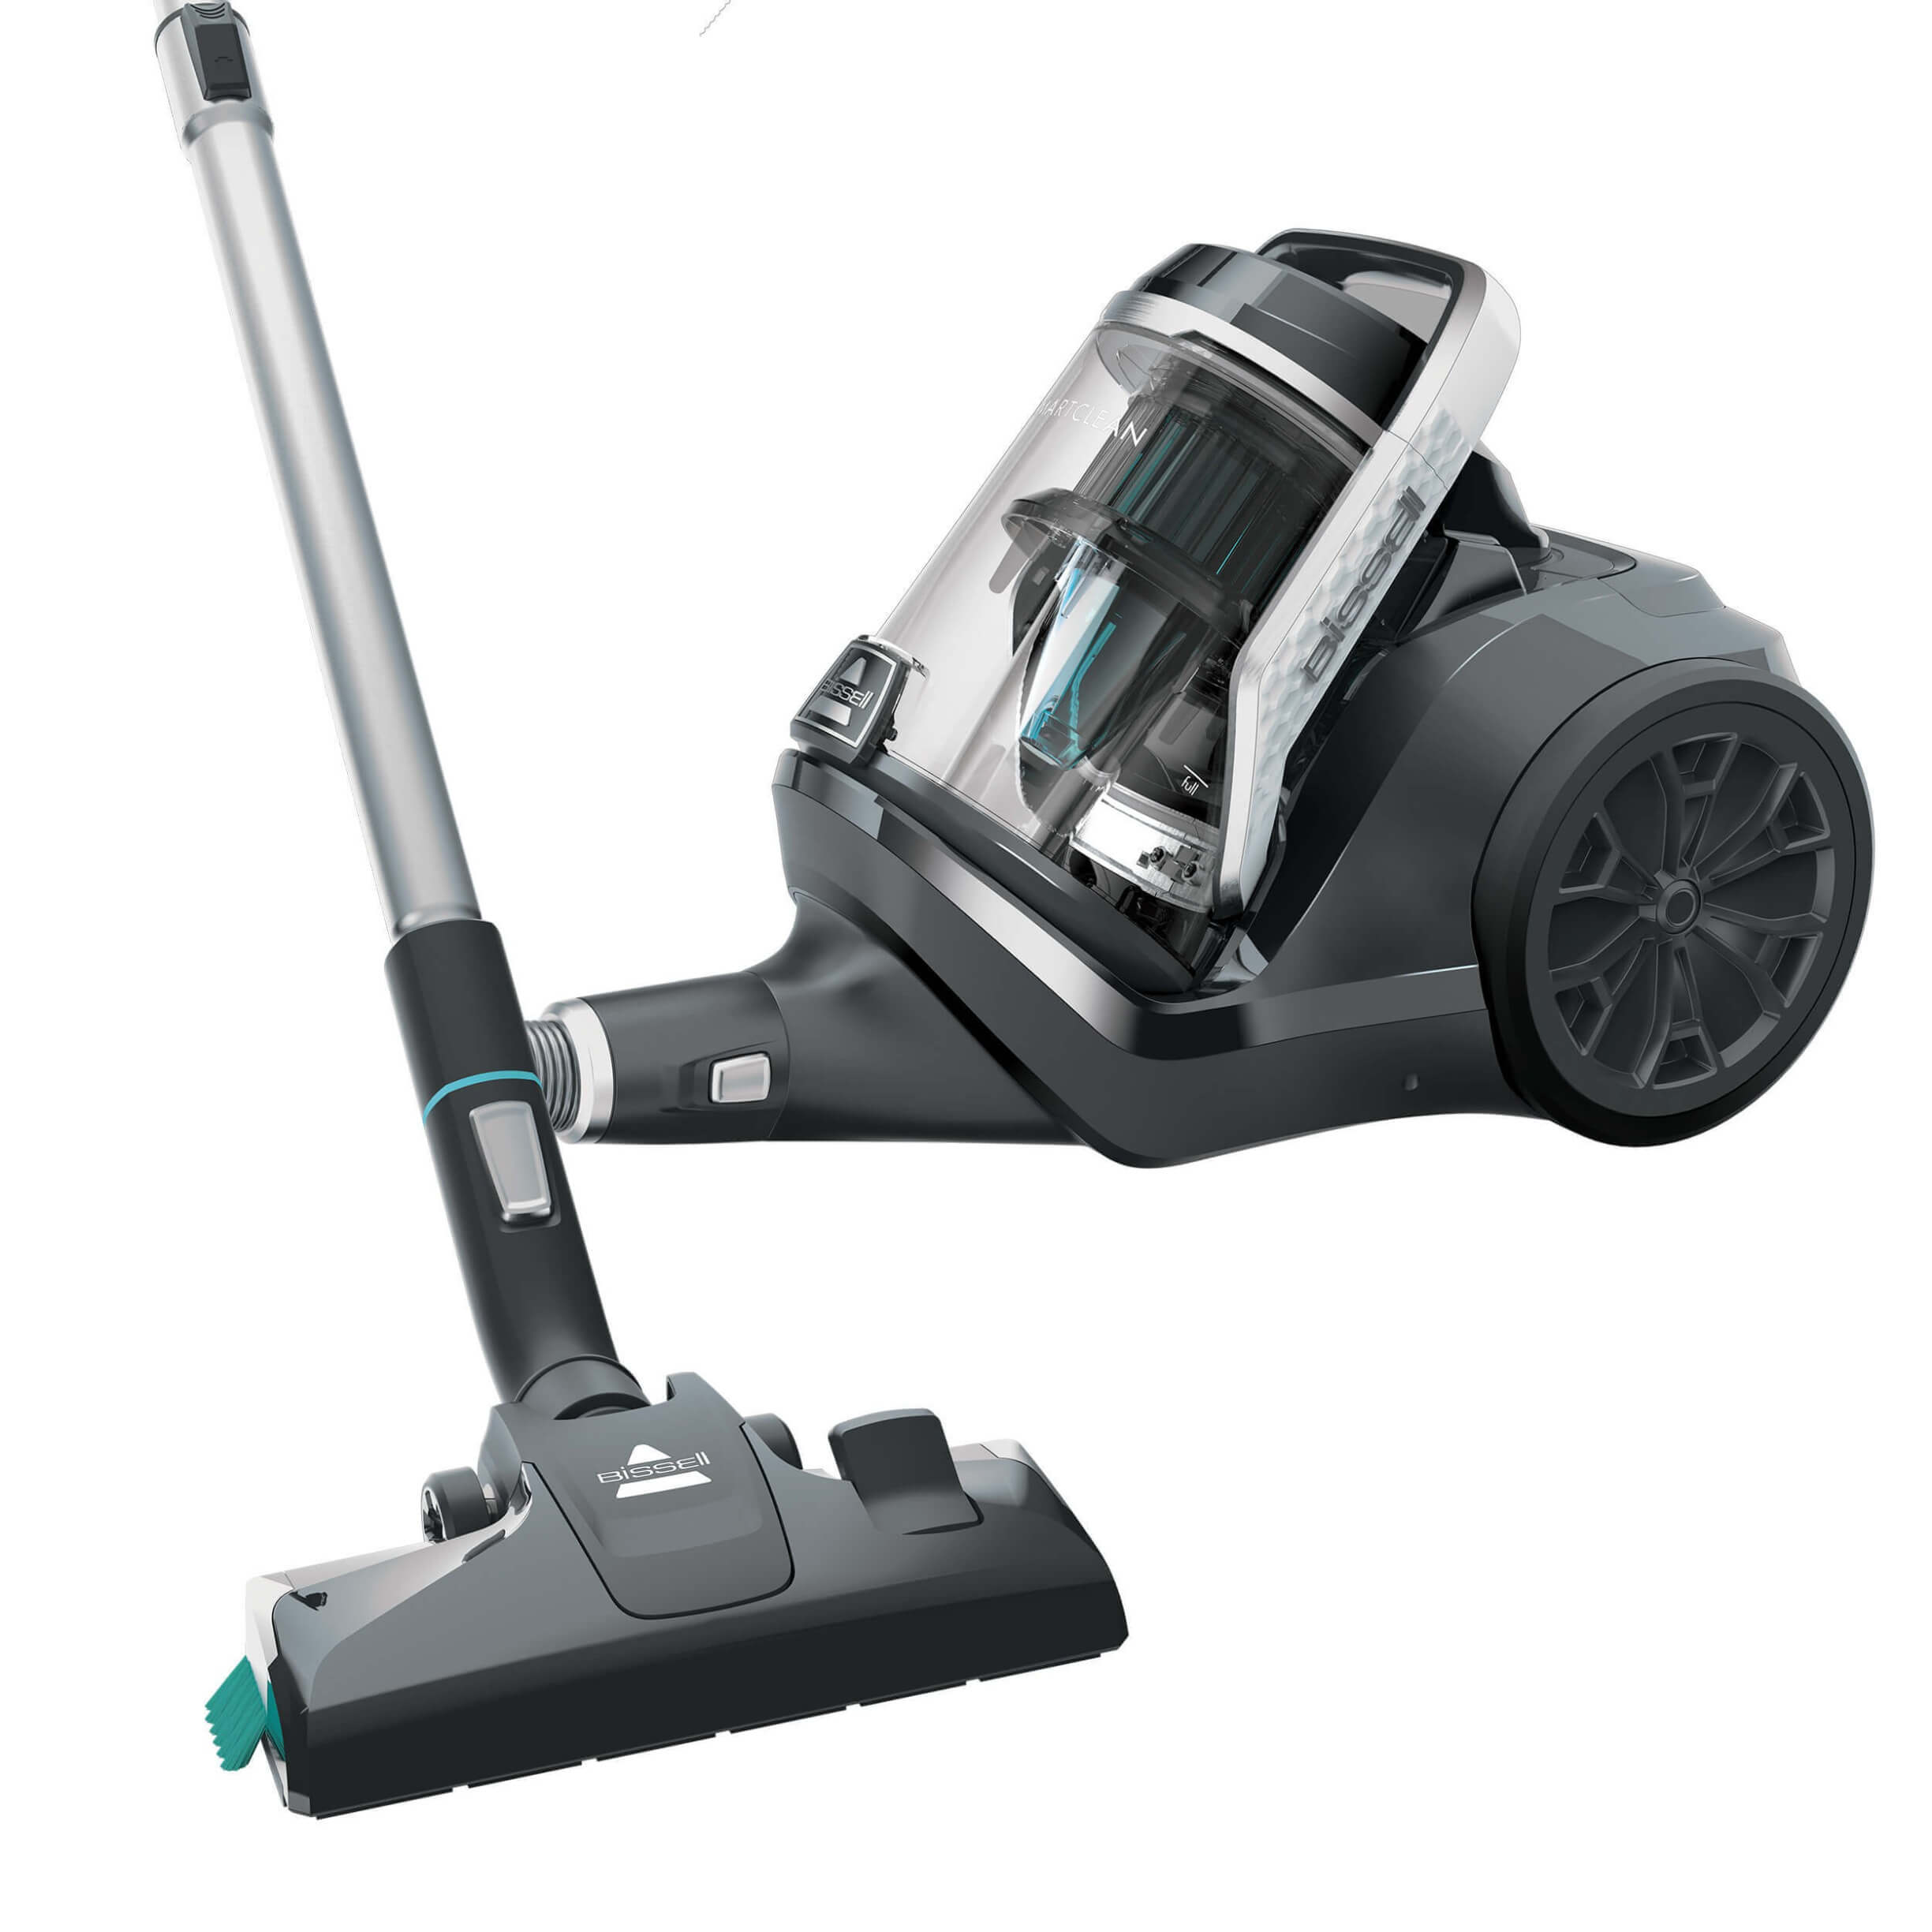 SmartClean® Canister Vac 2268 BISSELL Vacuums Cleaners